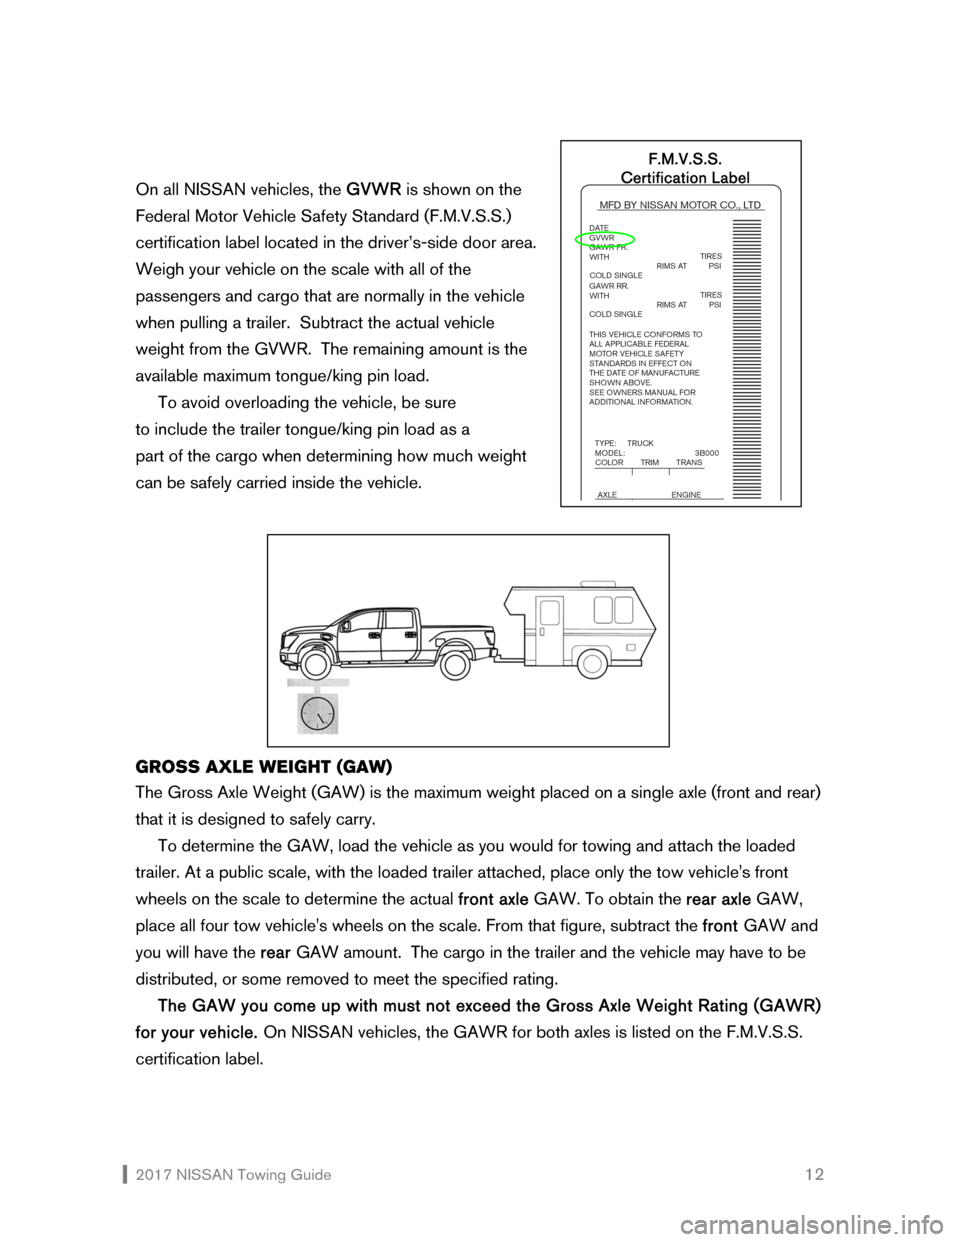 NISSAN ROGUE 2017 2.G Towing Guide  2017 NISSAN Towing Guide    12  
On all NISSAN vehicles, the GVWR is shown on the  
Federal Motor Vehicle Safety Standard (F.M.V.S.S.) 
certification label located in the driver’s-side door area.  